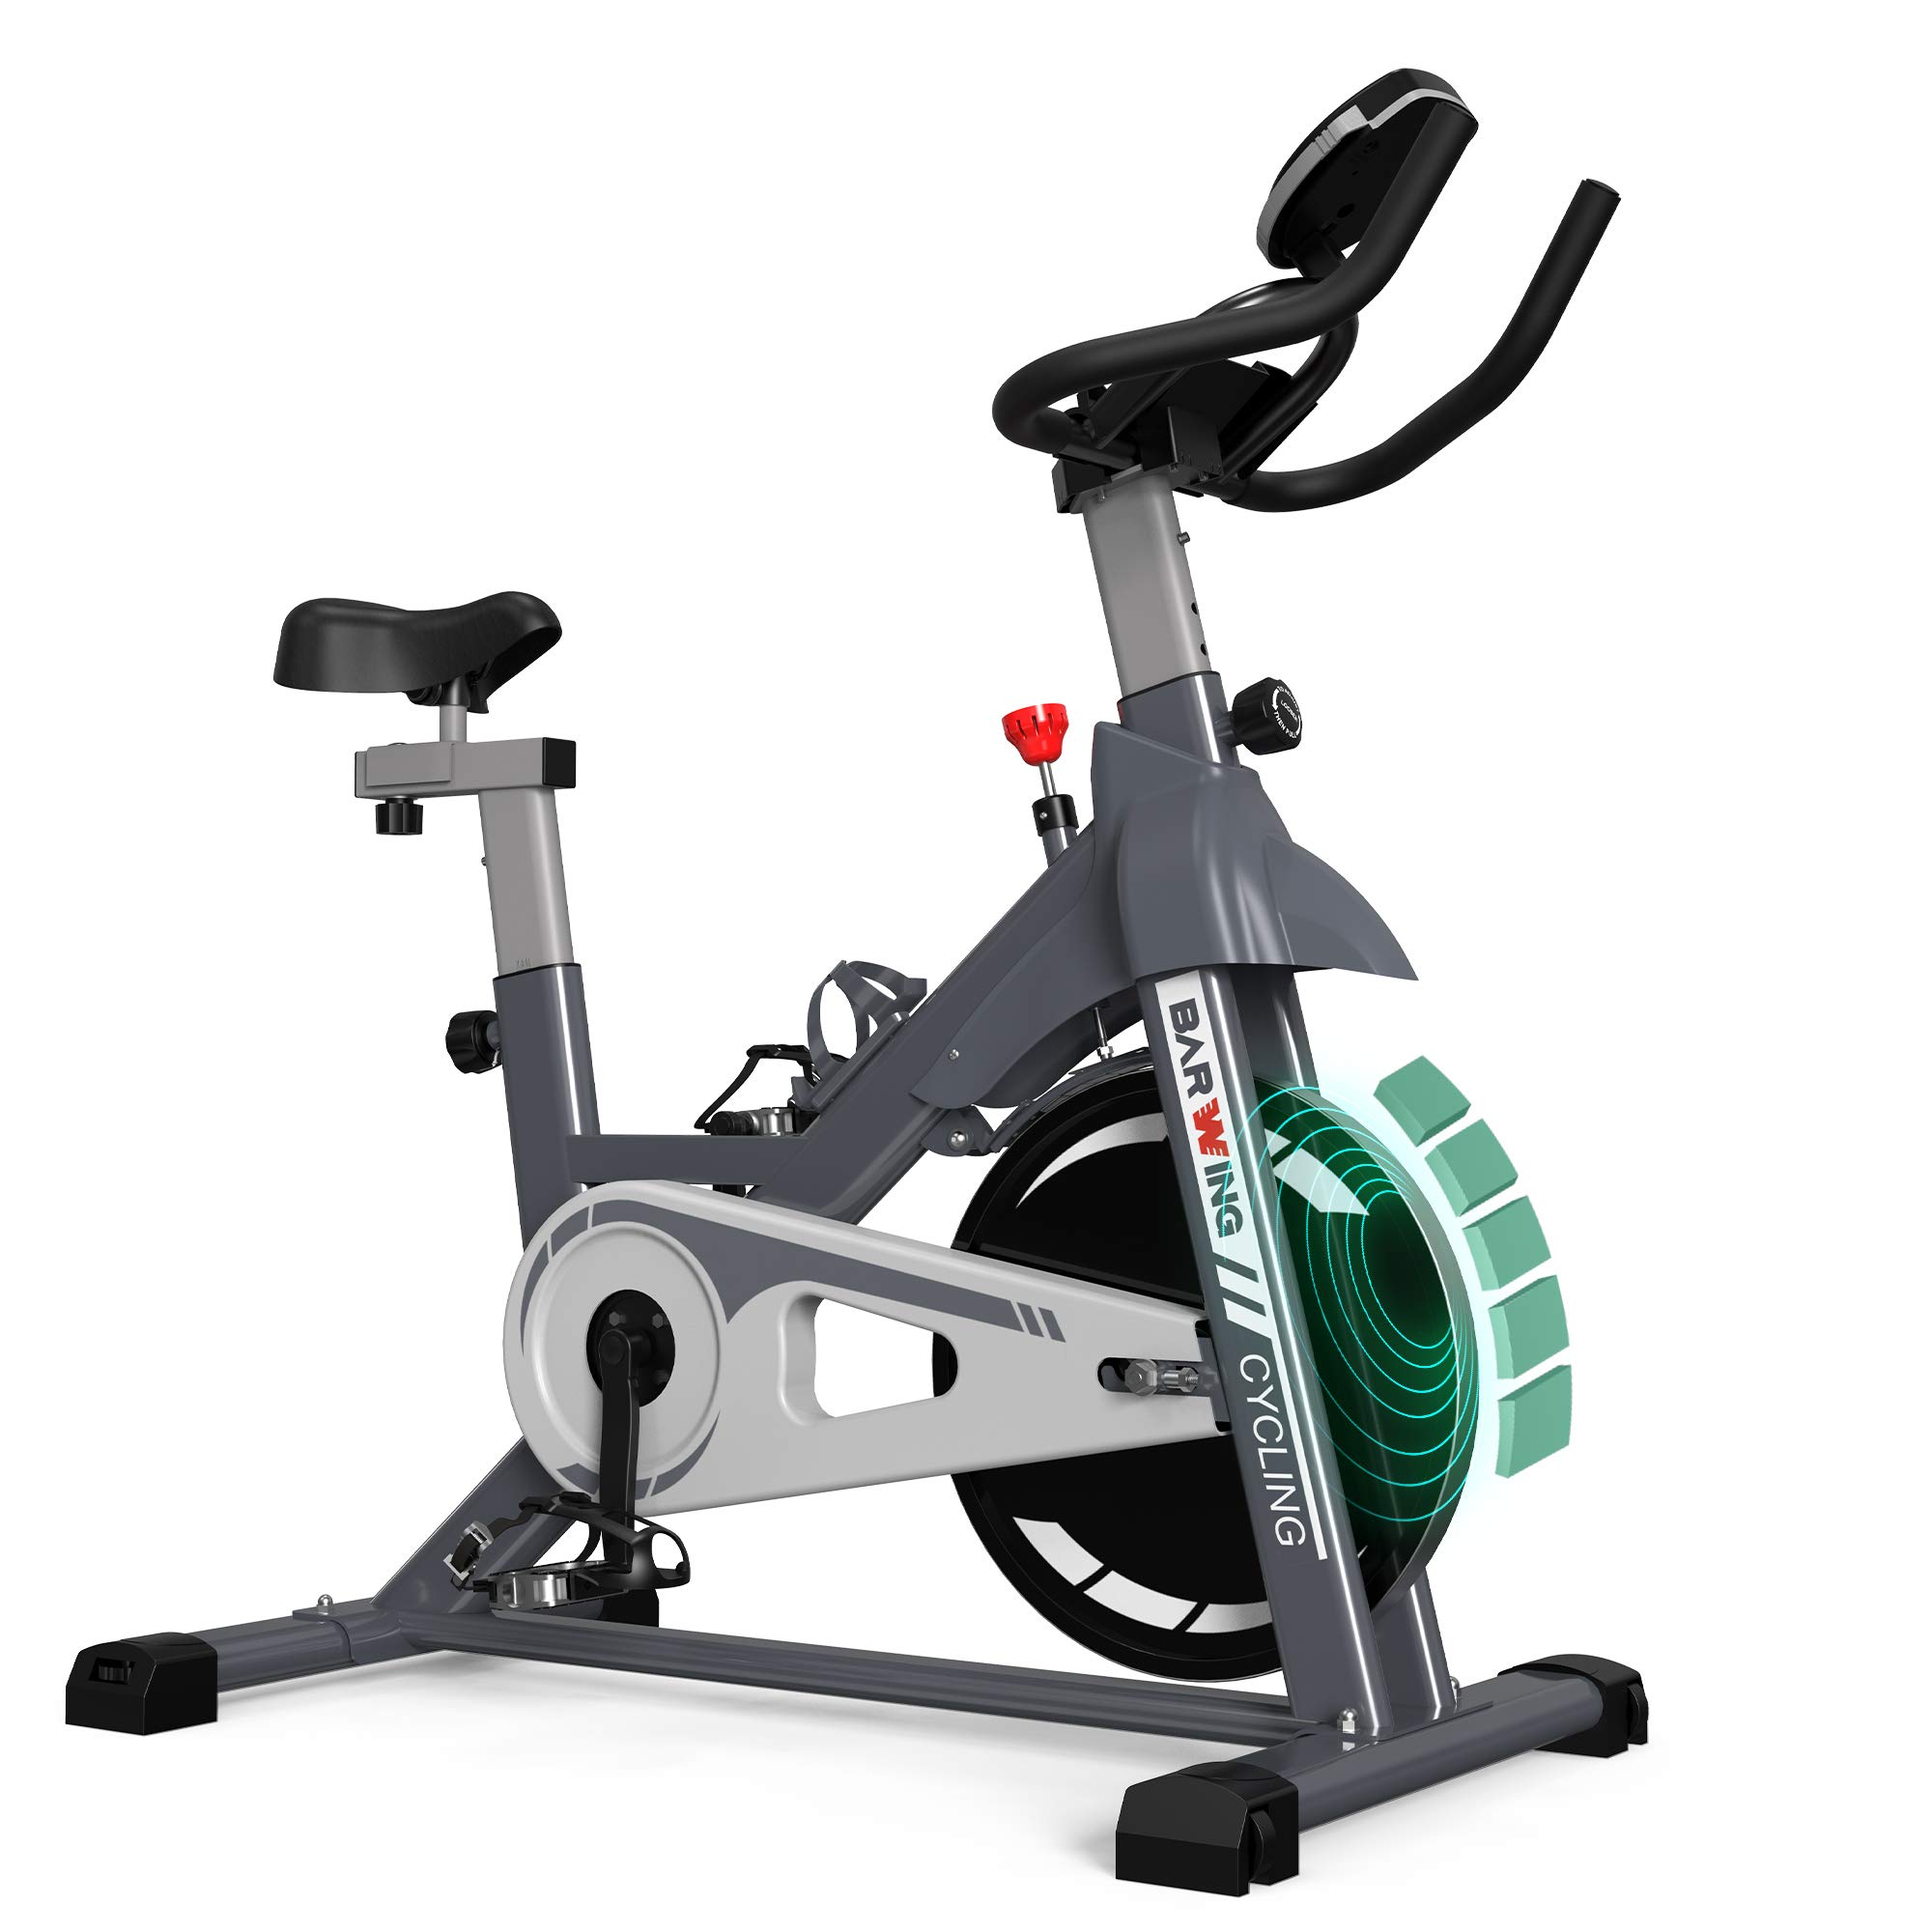 Barwing Exercise Bike Review: The Ultimate Home Fitness Companion